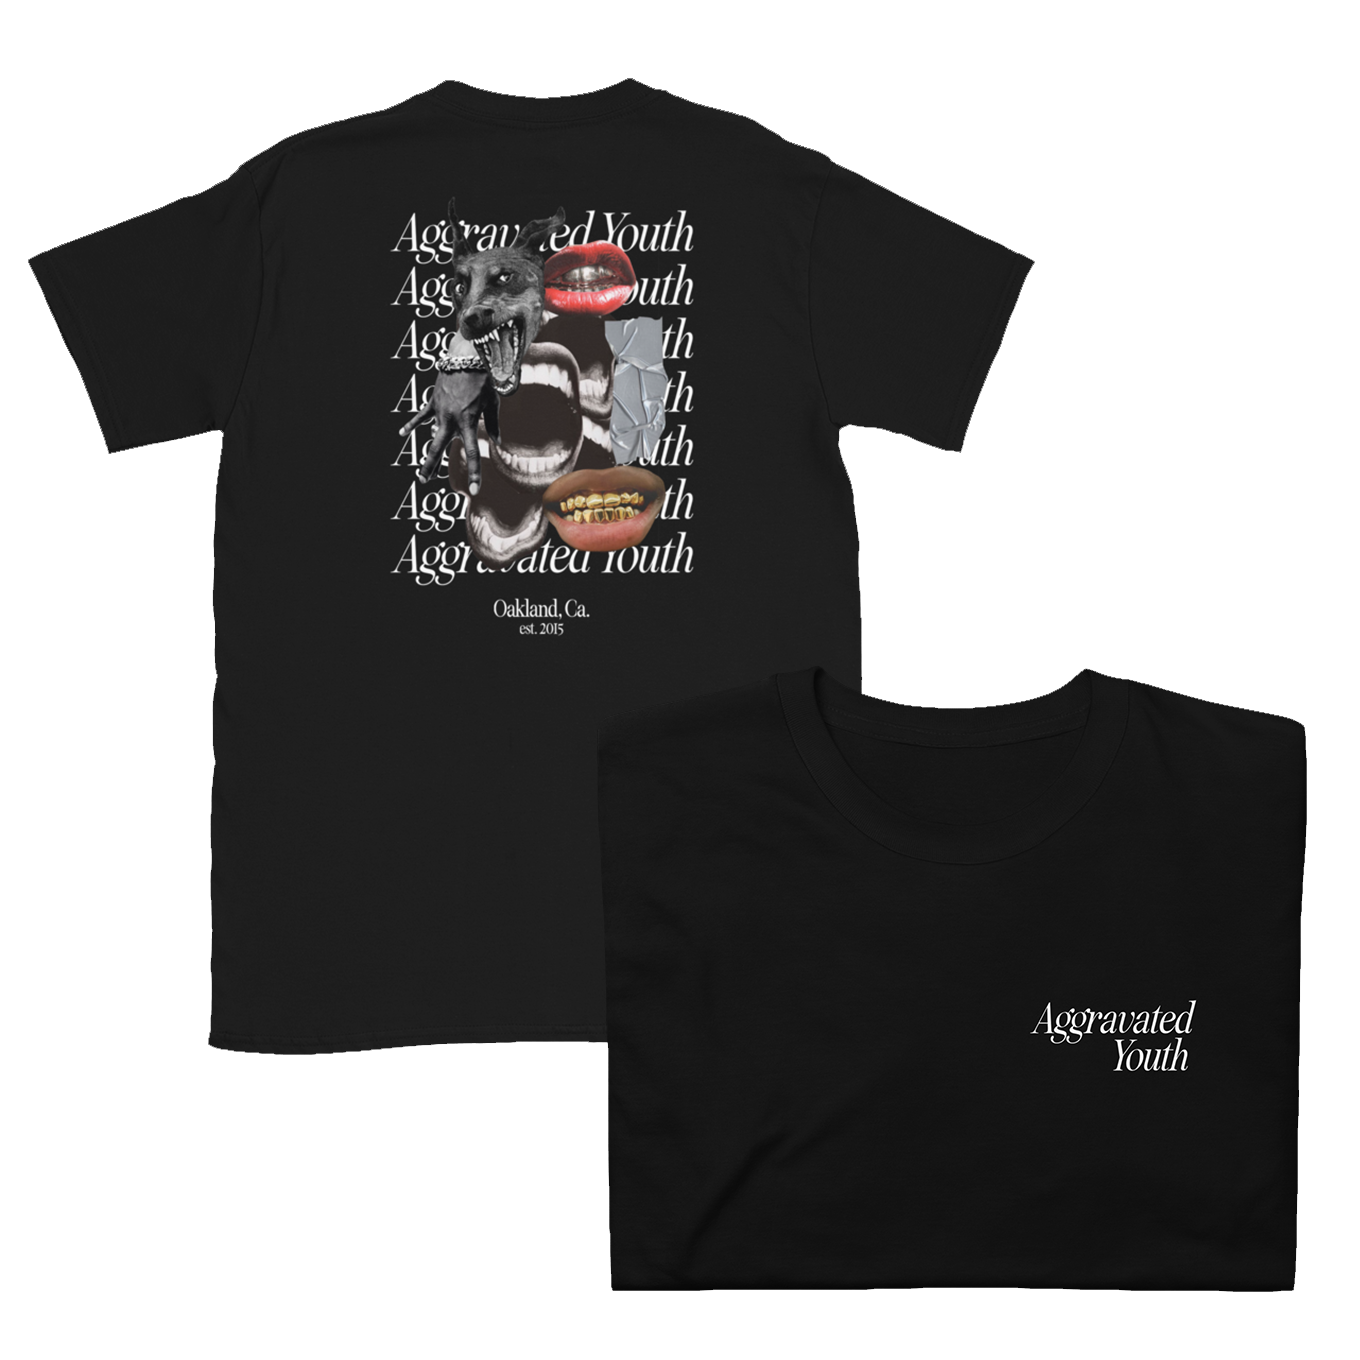 Aggravated Youth T-Shirt